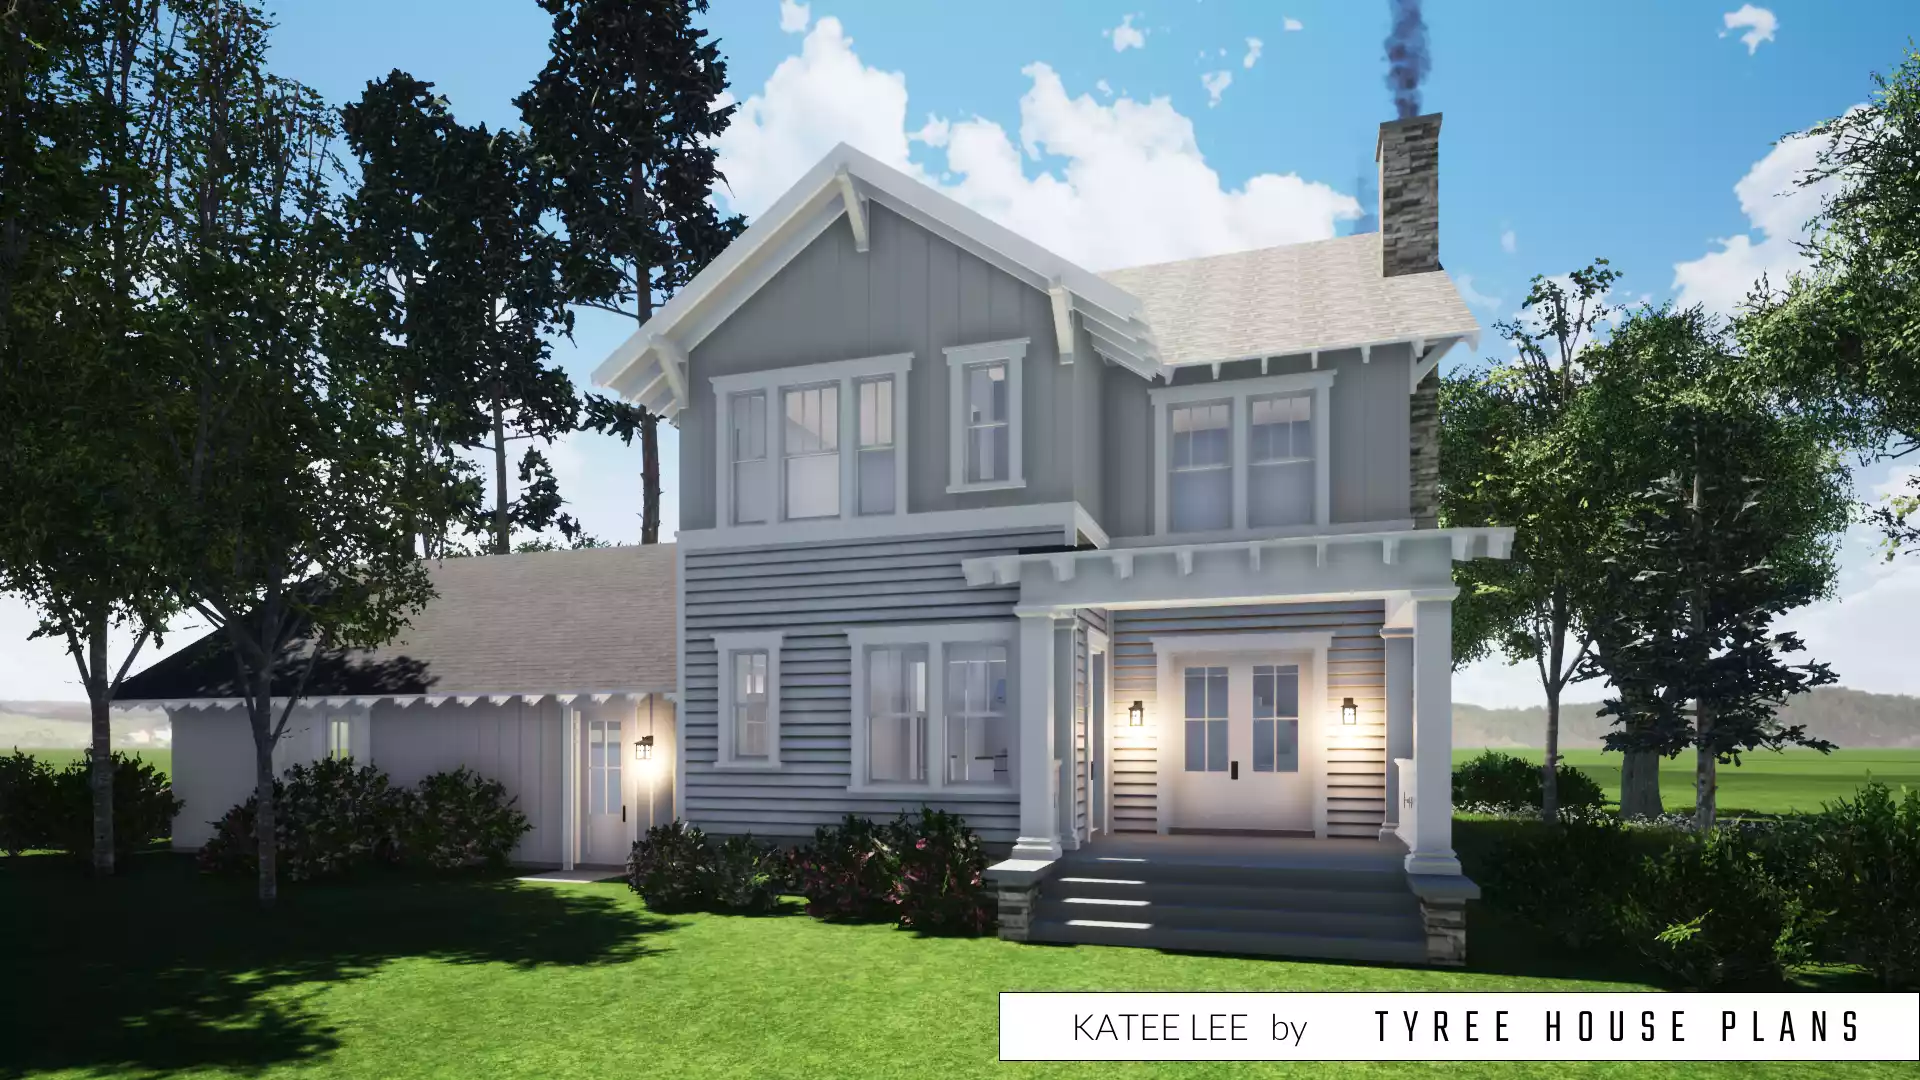 Katee Lee by Tyree House Plans